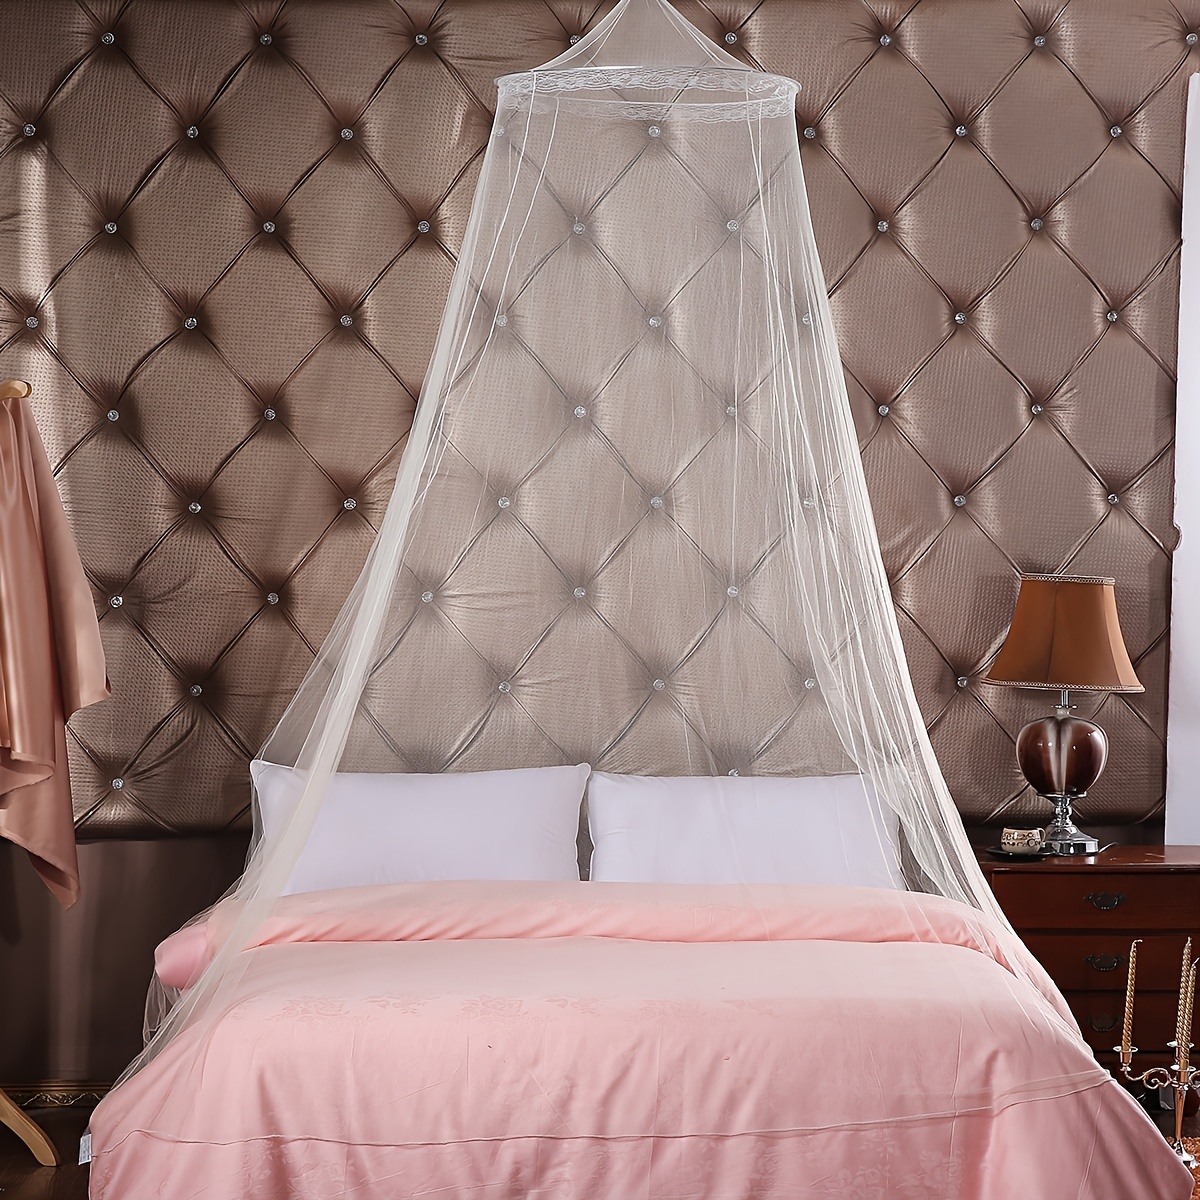 

Elegant Princess- Mosquito Net - 1.5m To 1.8m, Easy Install, No Power Needed, Includes Stand, Hand Washable Polyester Mosquito Net For Bed